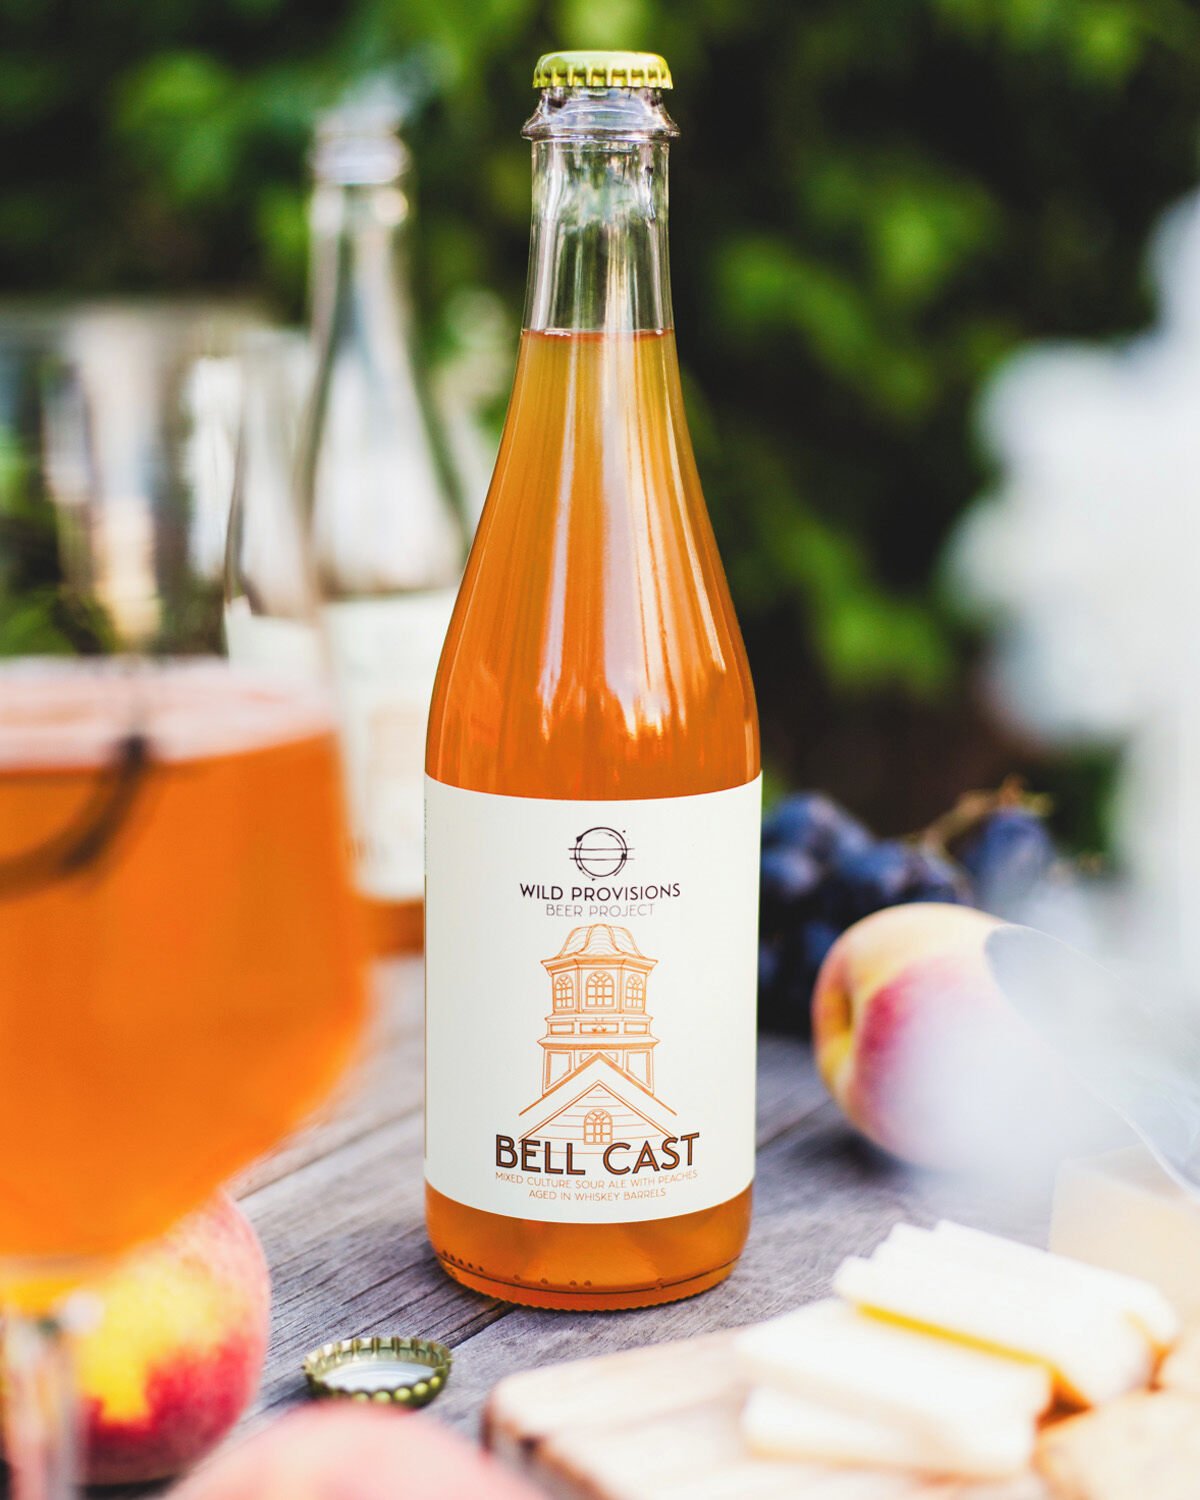 Bell Cast is our new peach mixed culture sour ale aged in Stranahan's whiskey barrels. With aromas of fresh-pressed peaches, hay, farmyard, and some spritzy acidity, the flavor is big bright peach up front. This sour is bone dry with a nice tannic st